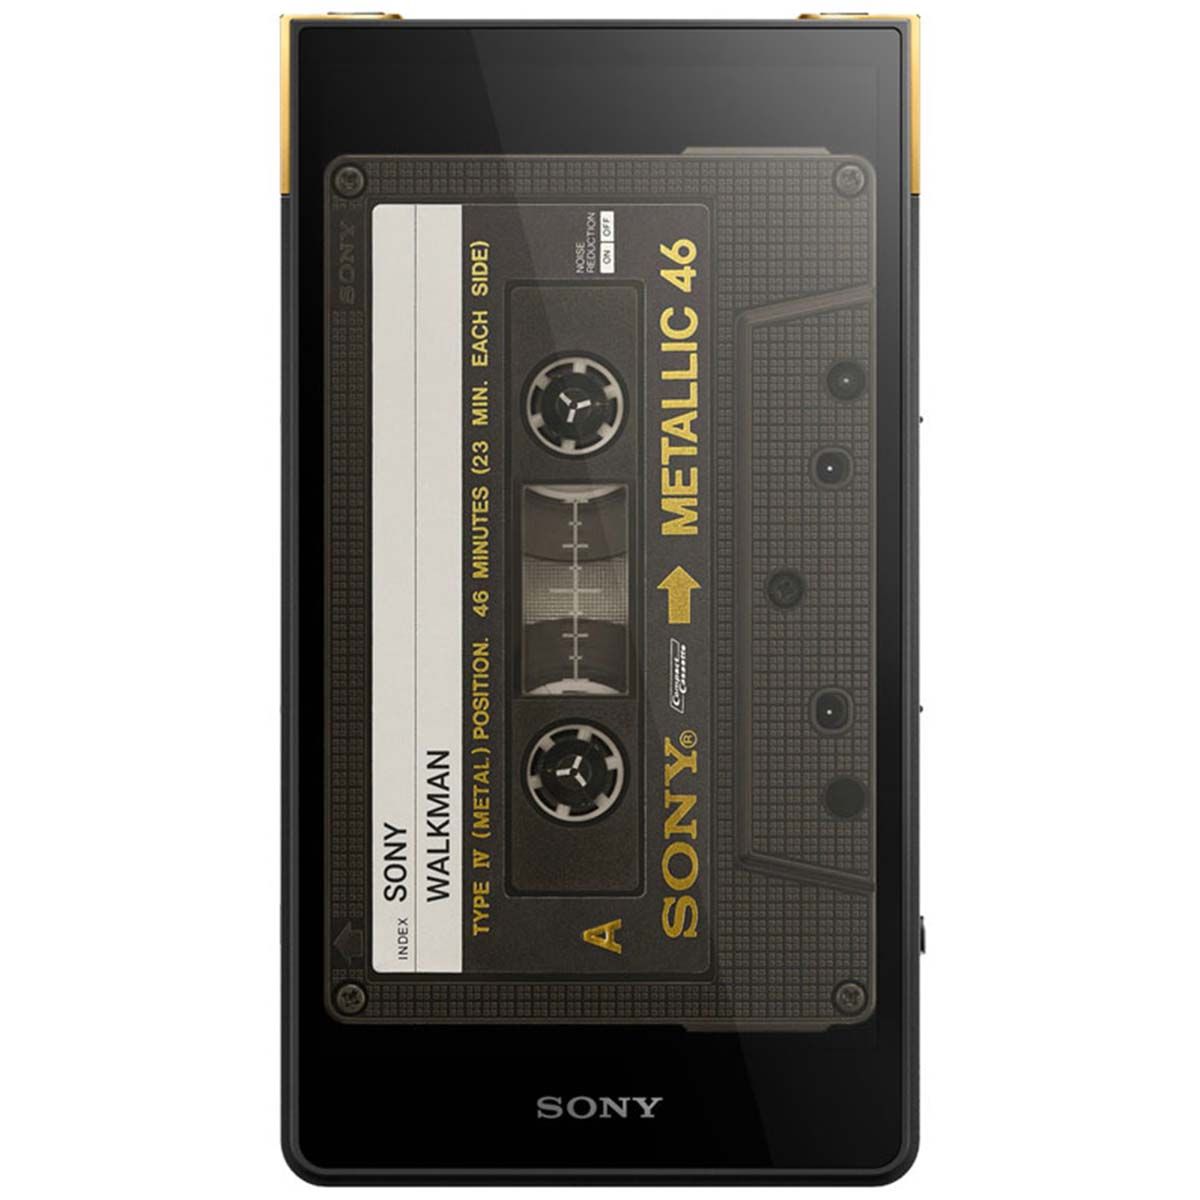 Sony NW-ZX707 Digital Media Player front view with cassette mode